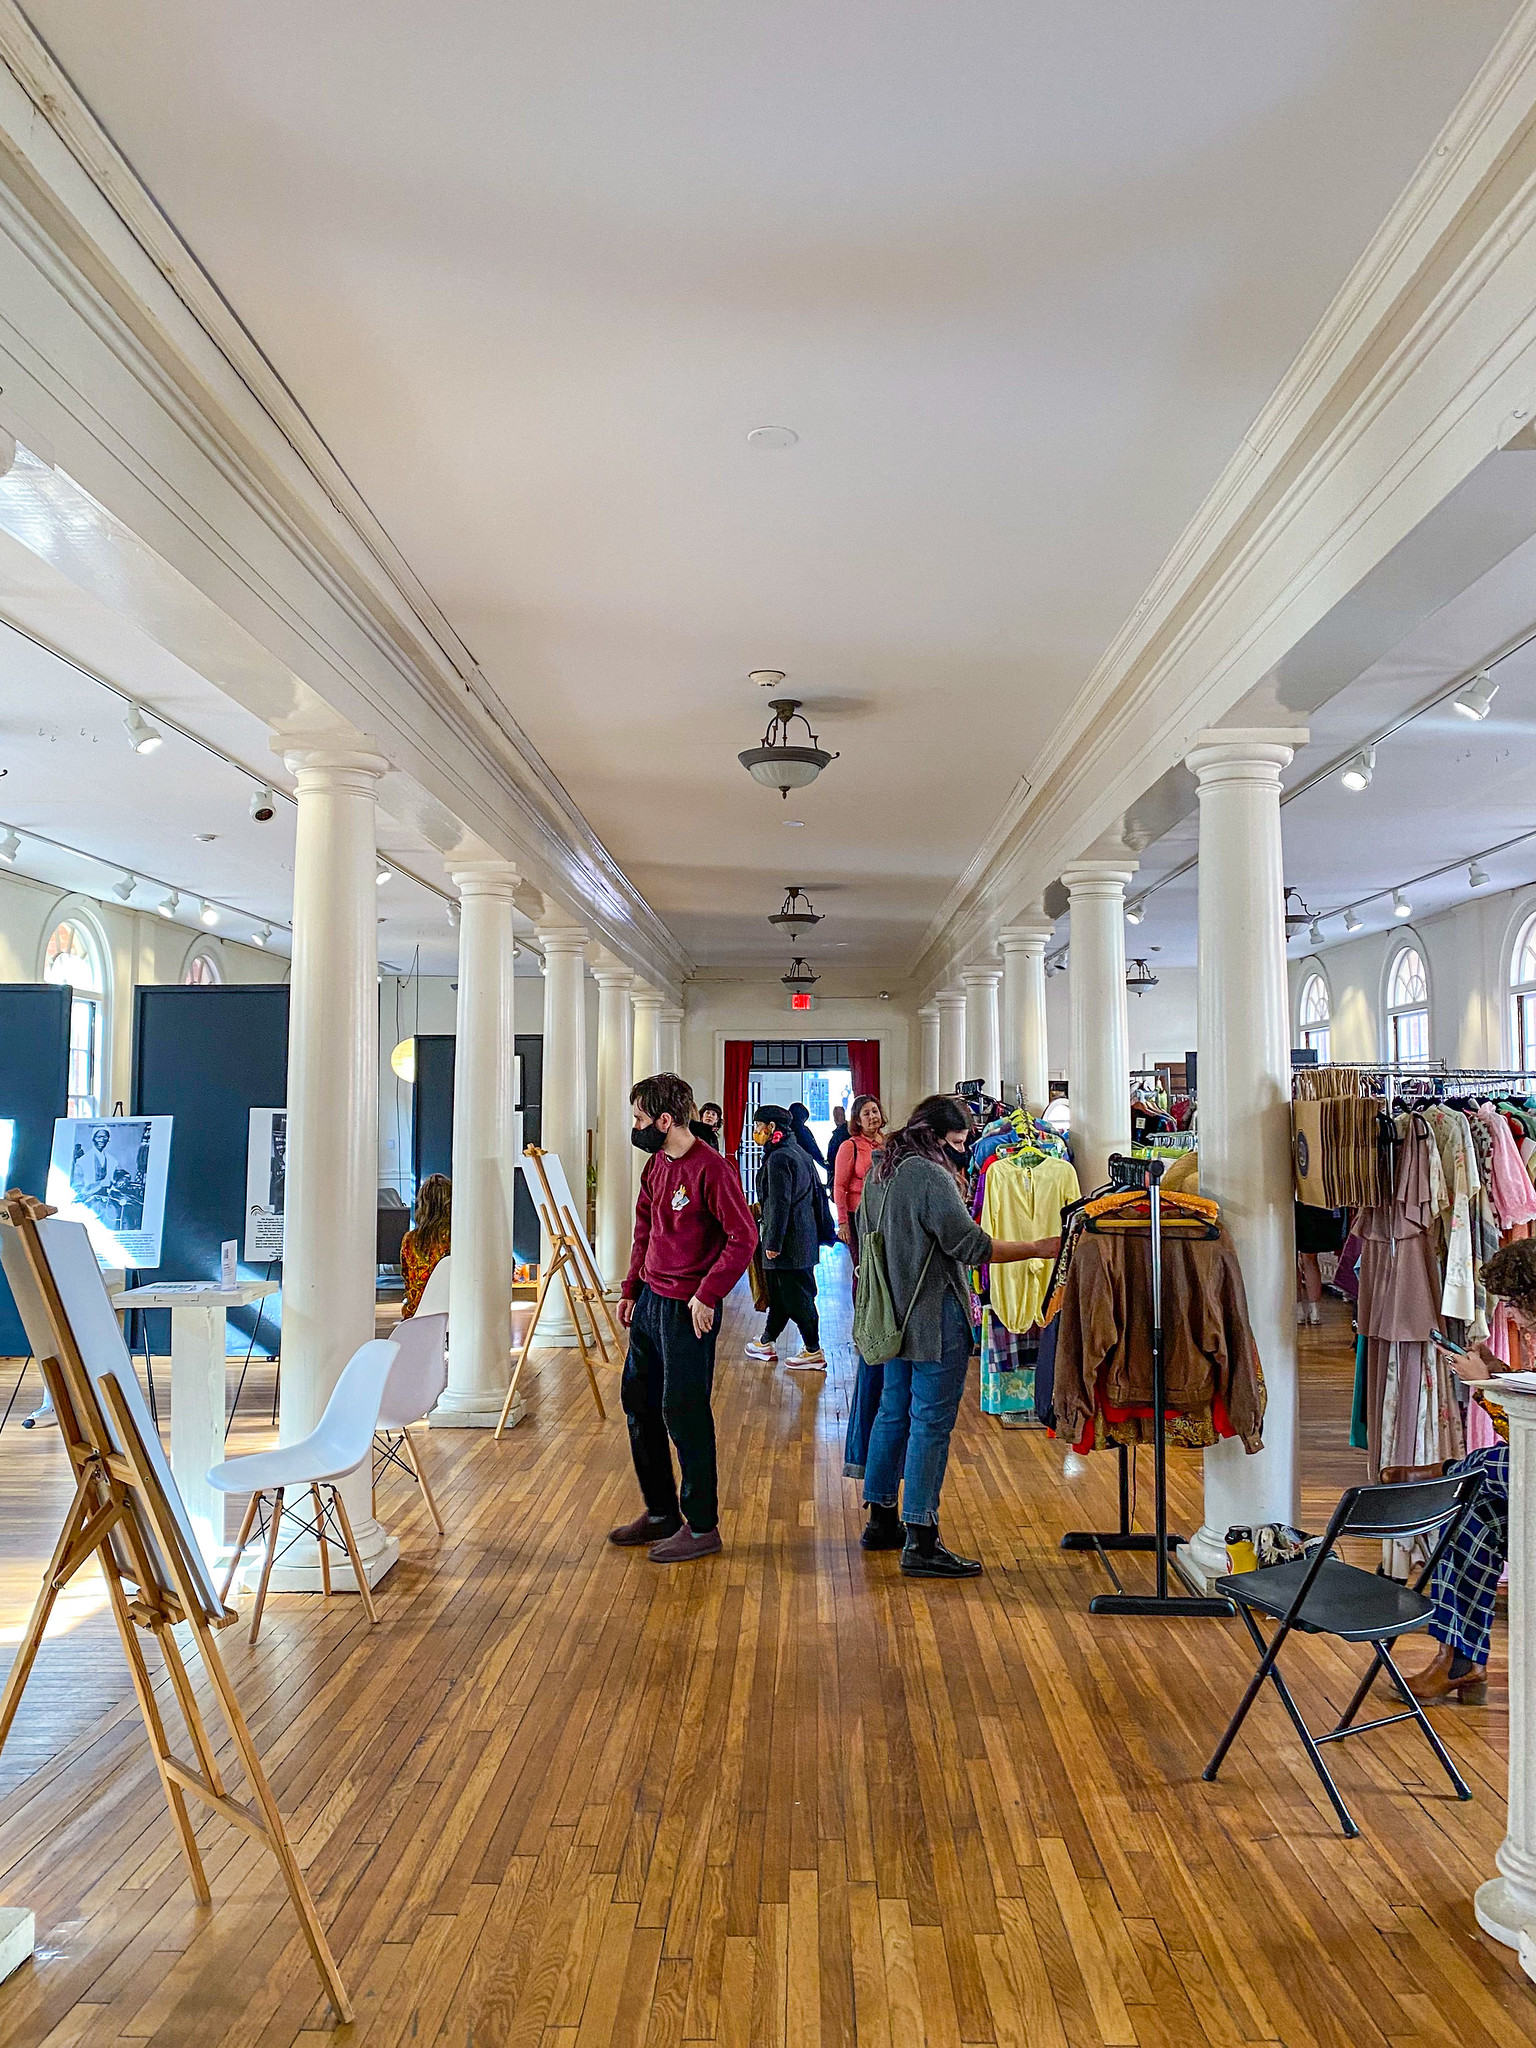 People walk around the Old Town Hall looking at vintage clothing items.